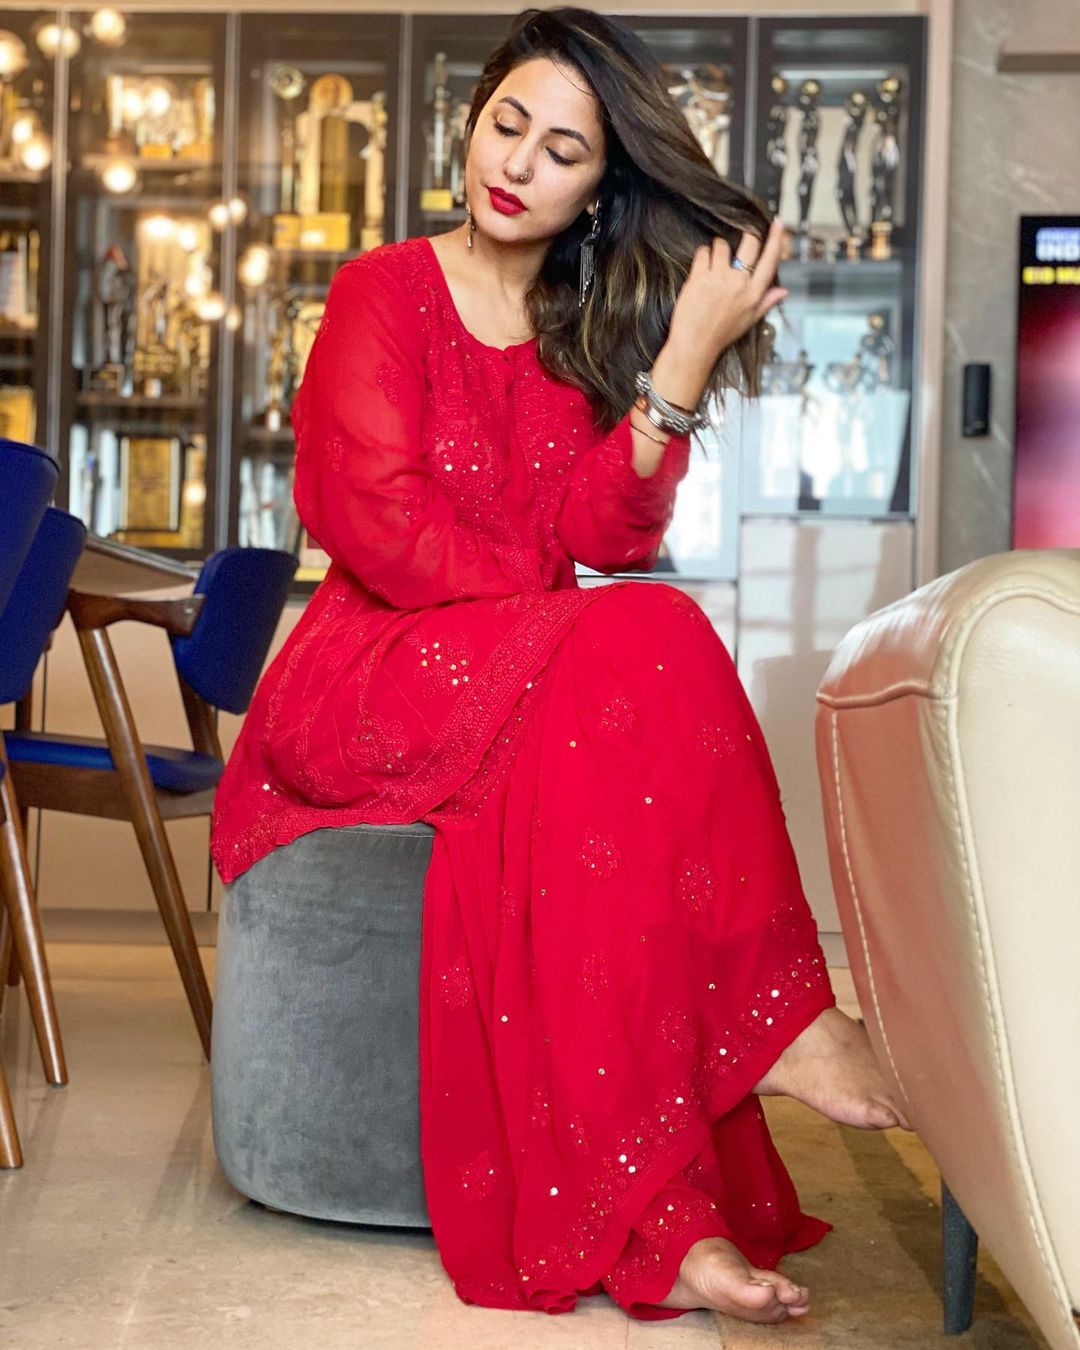 Hina Khan looks attractive in in the glittery red outfit.